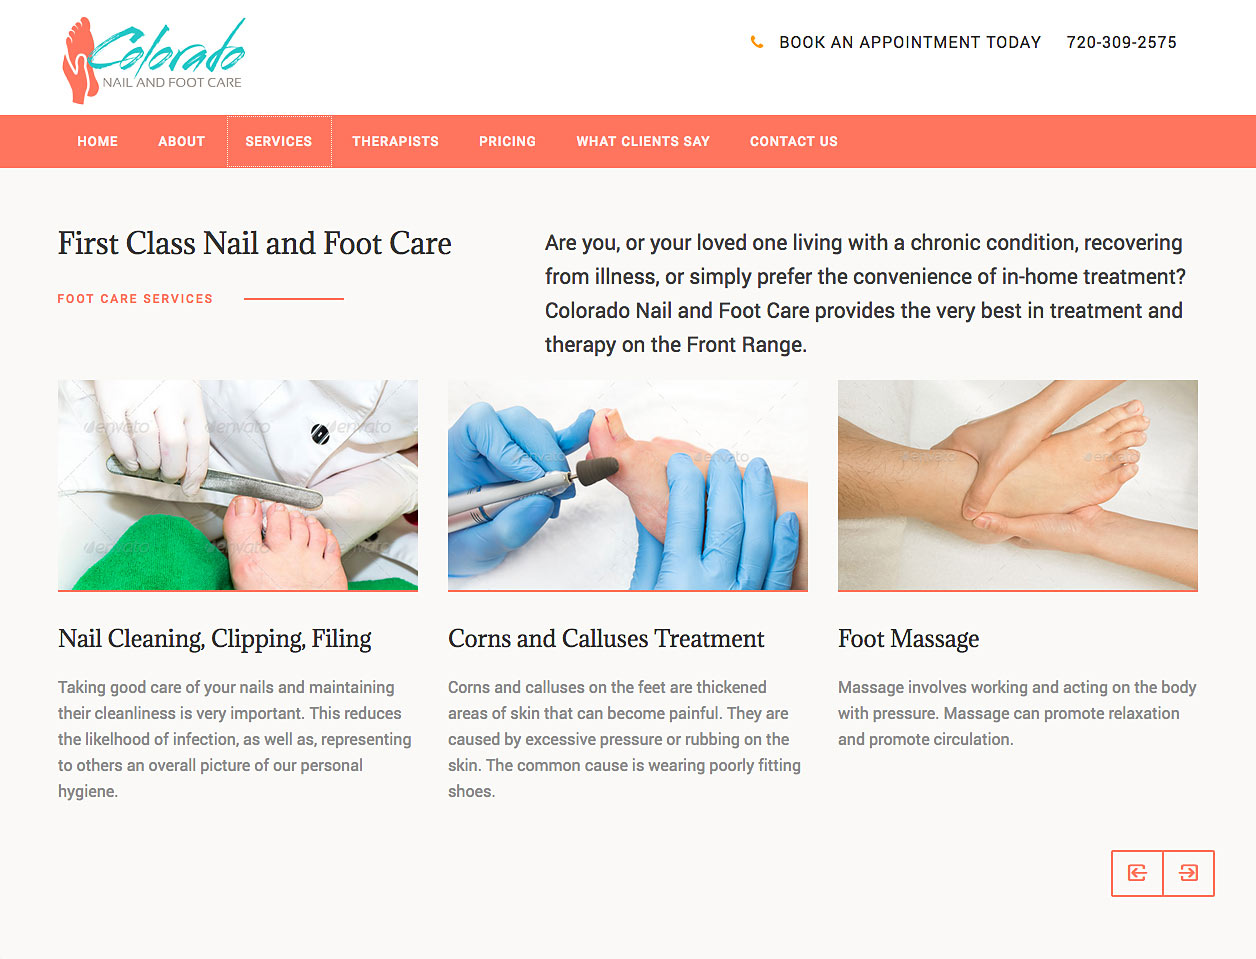 Image of Colorado Nail and Foot Care website